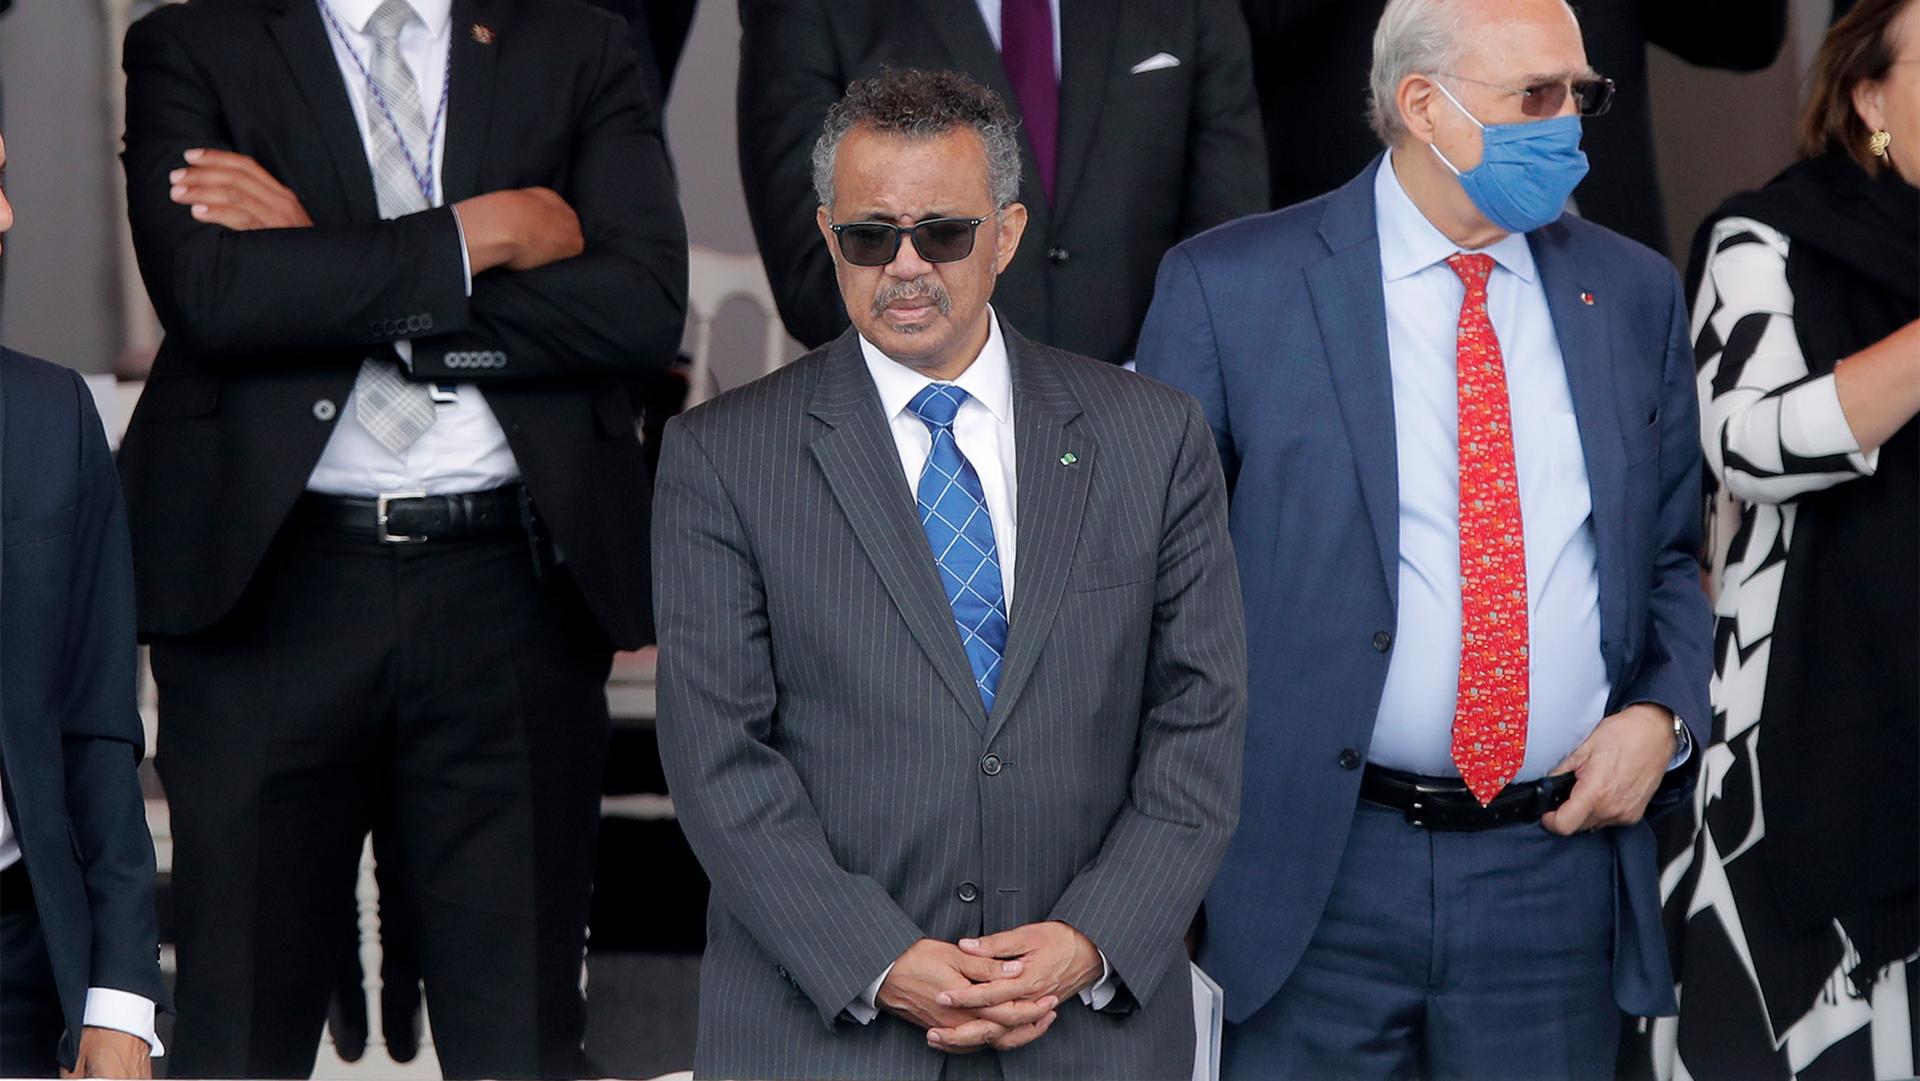 Men in suits, some wearing masks and sunglasses stand together